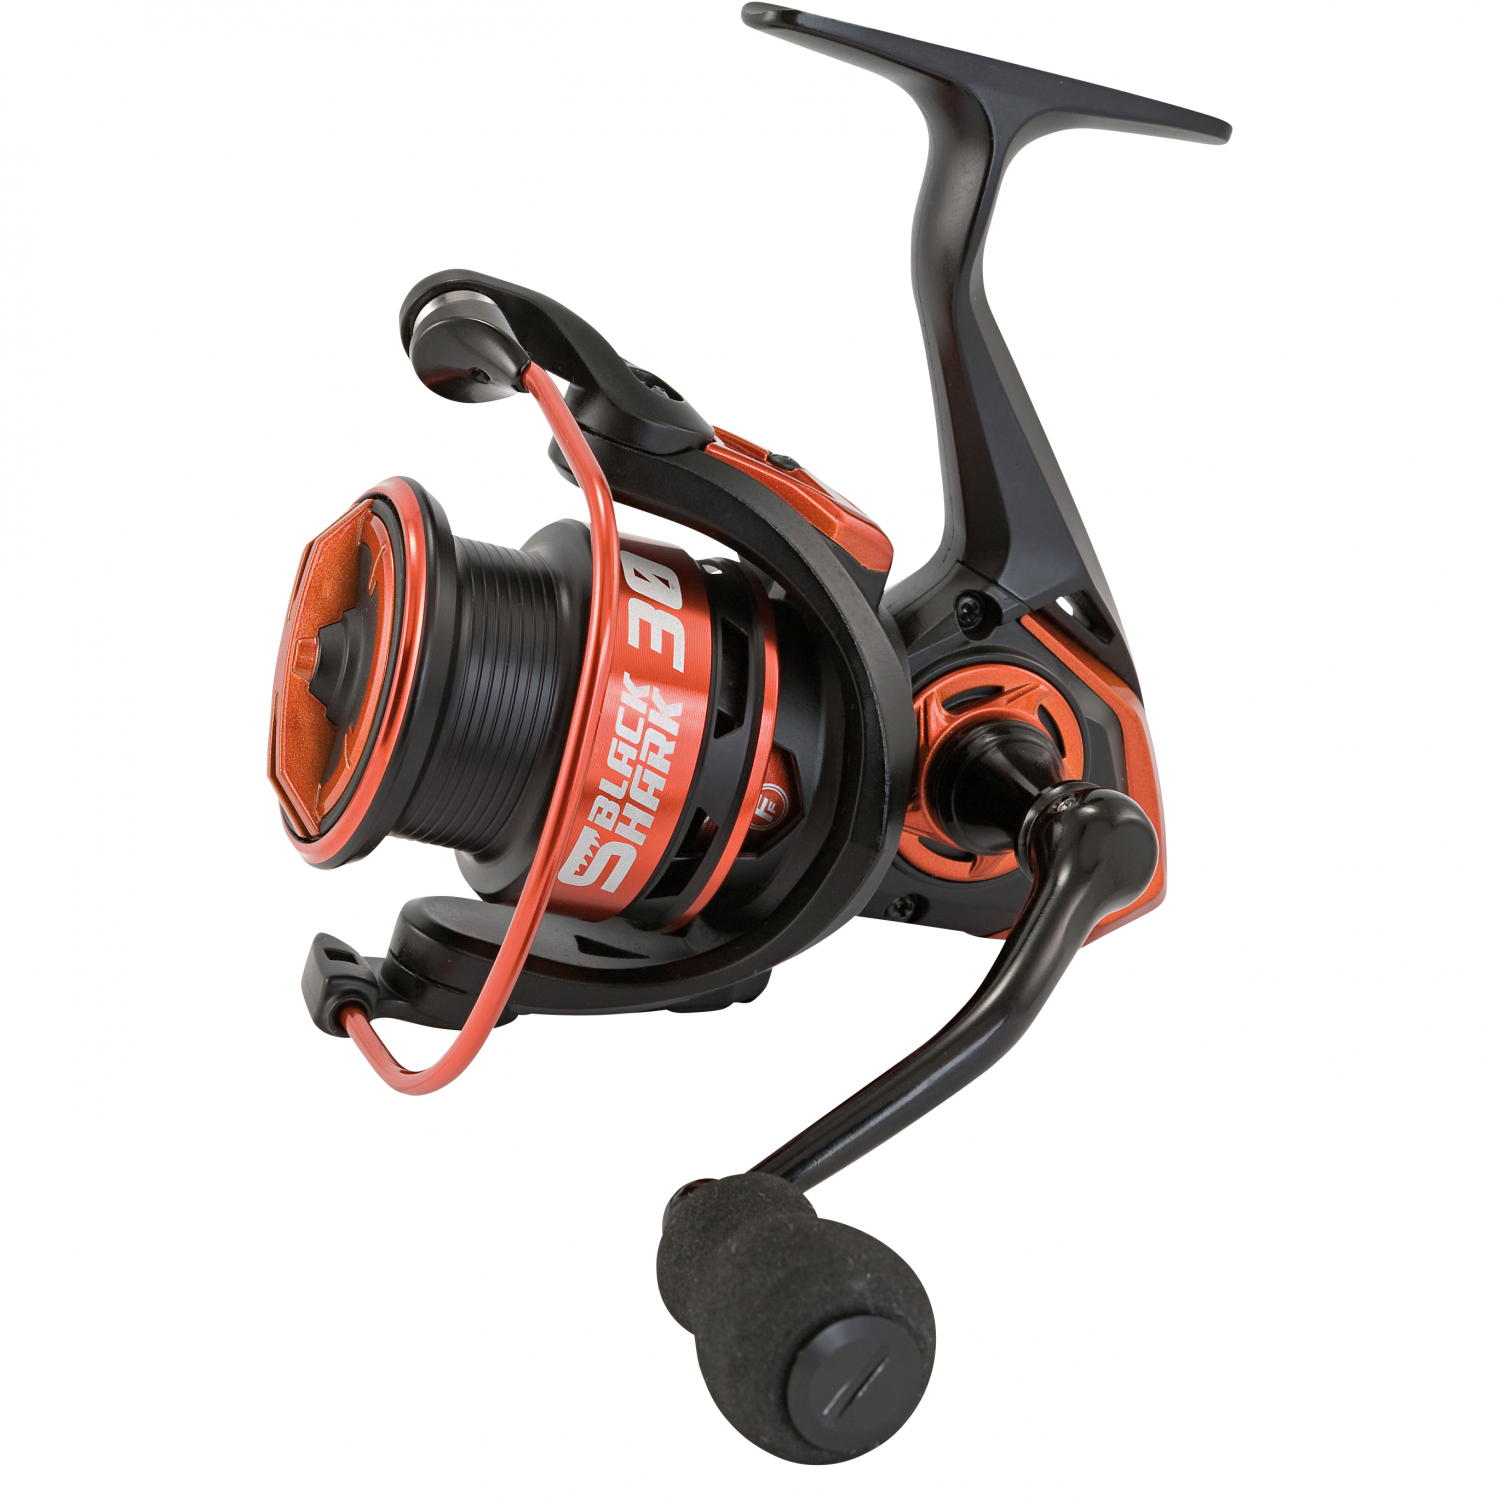 Lineaeffe Fishing Reel FF Black Shark at low prices